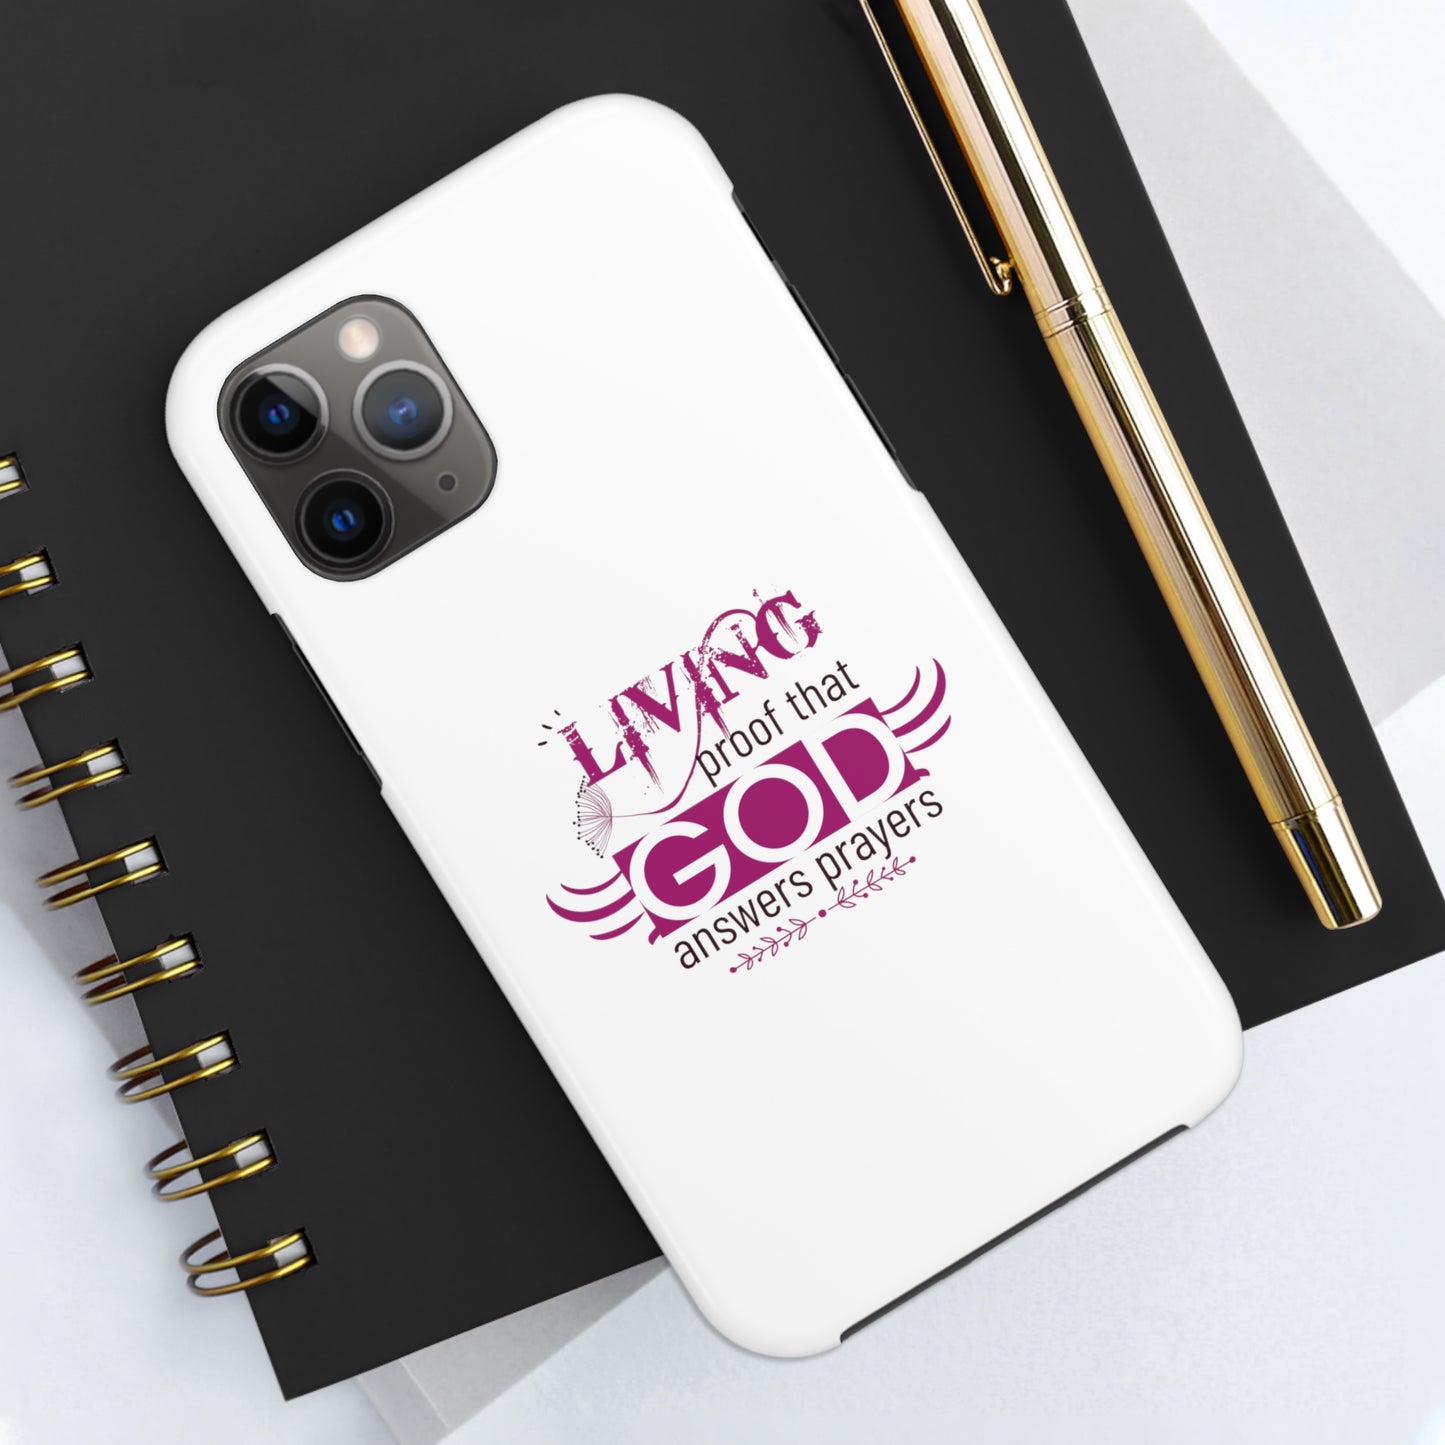 Living Proof That God Answers Prayers Tough Phone Cases, Case-Mate